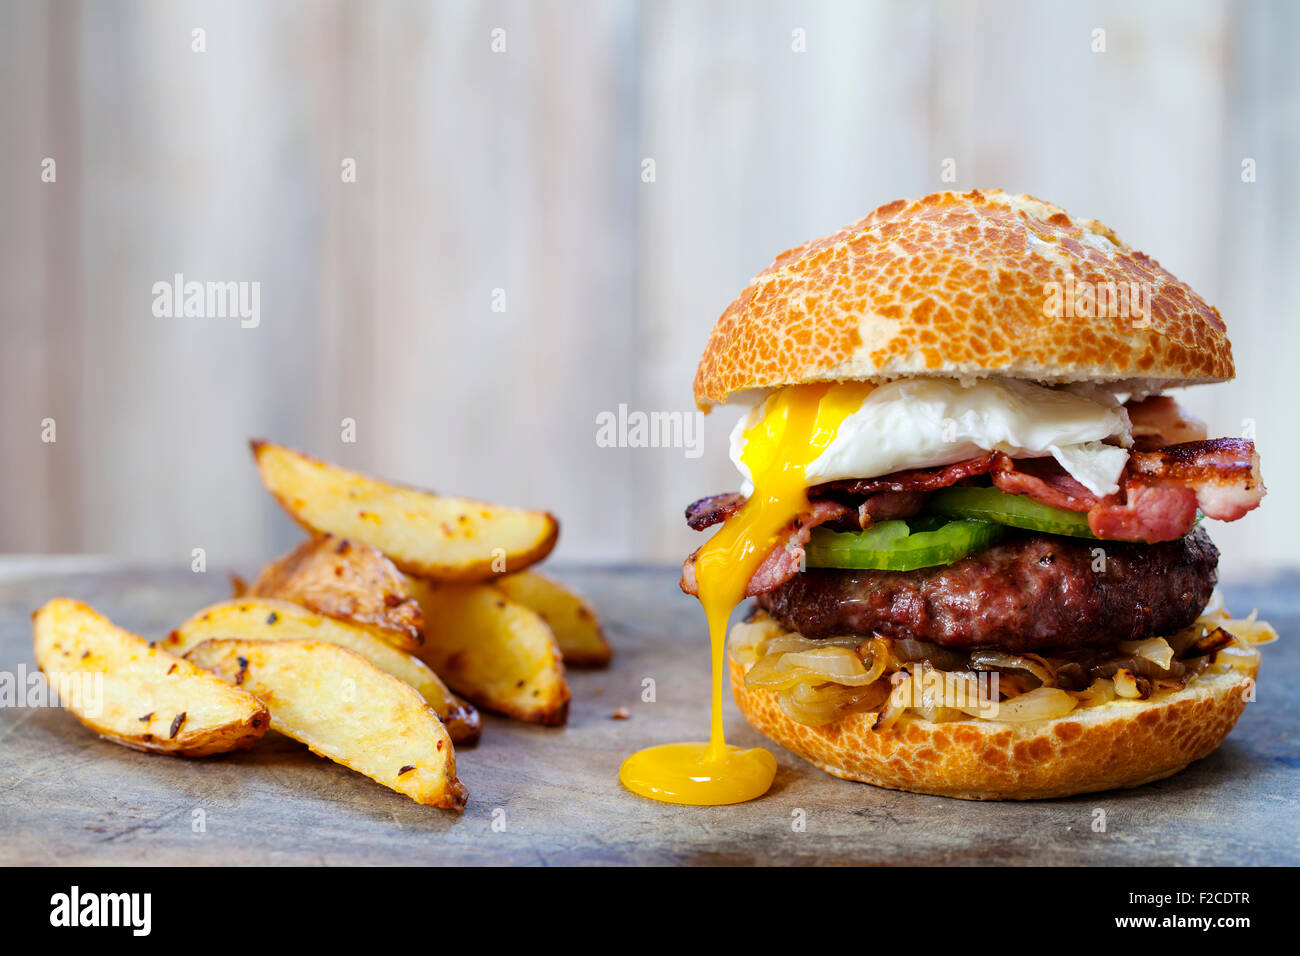 Beef burger with bacon and poached egg Stock Photo